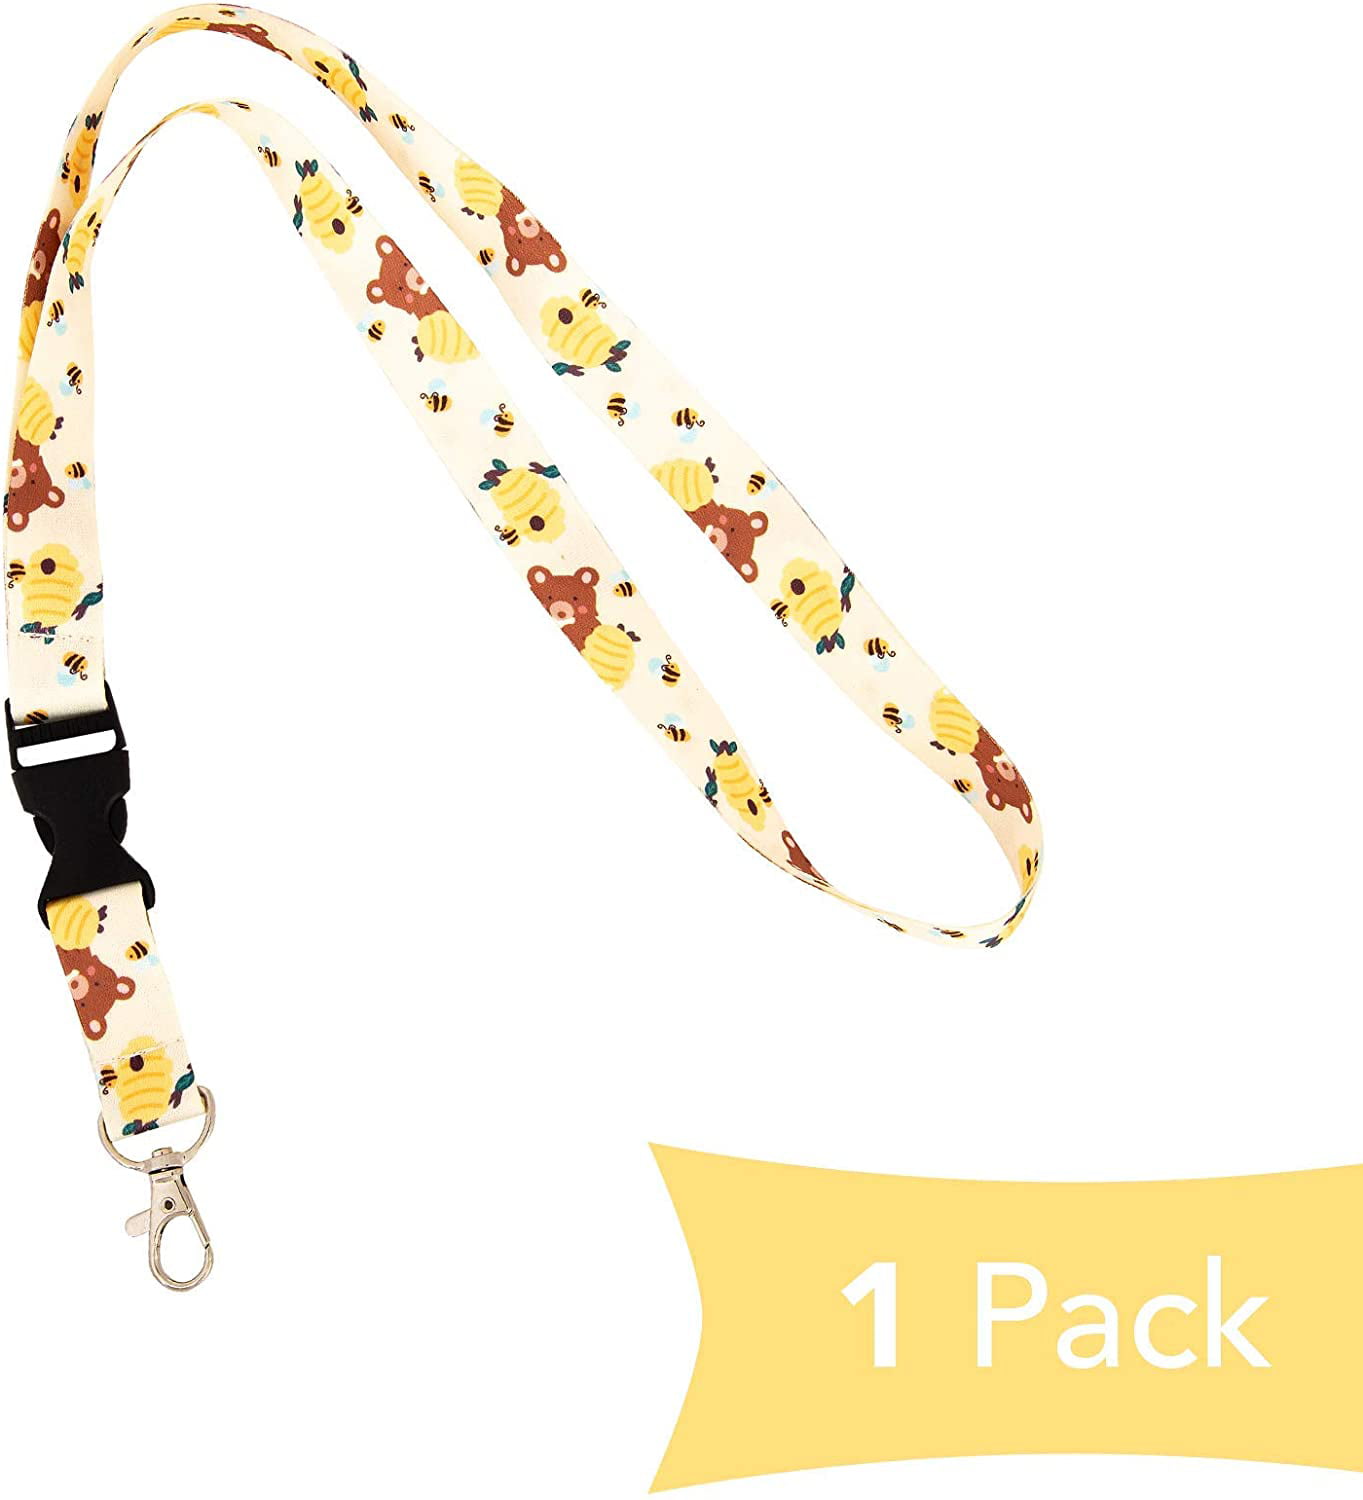 Accessories Keychains & Lanyards Lanyards & Badge Holders 40" Lanyard Yellow Honey bumble Bee ribbon ID badge holder safety breakaway fastener and swivel lobster clasp Beekeeper gift Manchester Bee 